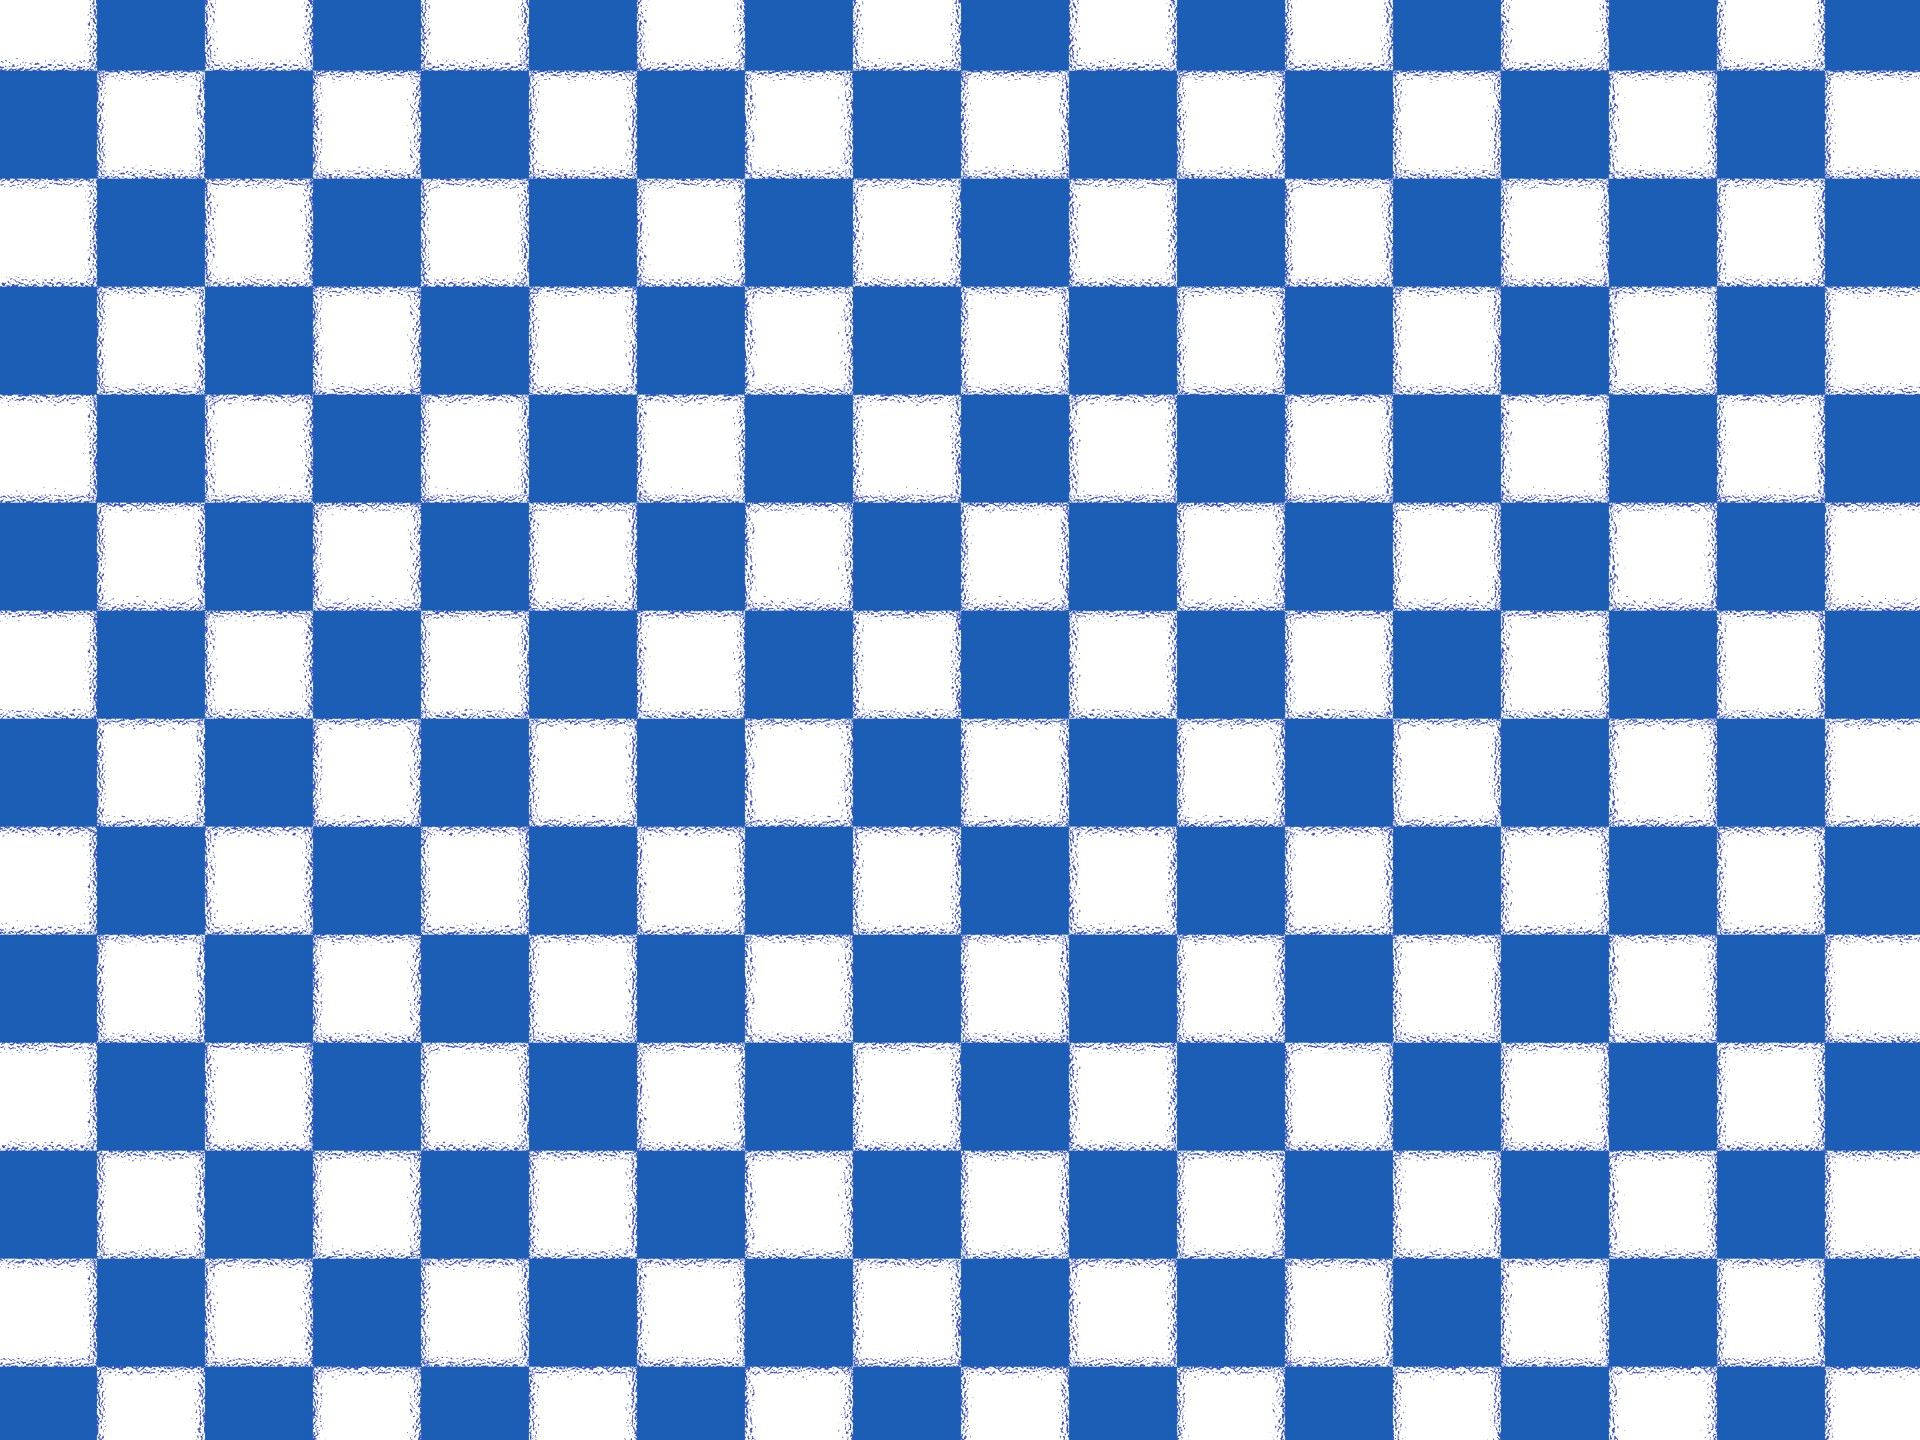 White And Blue Checkered Wallpaper